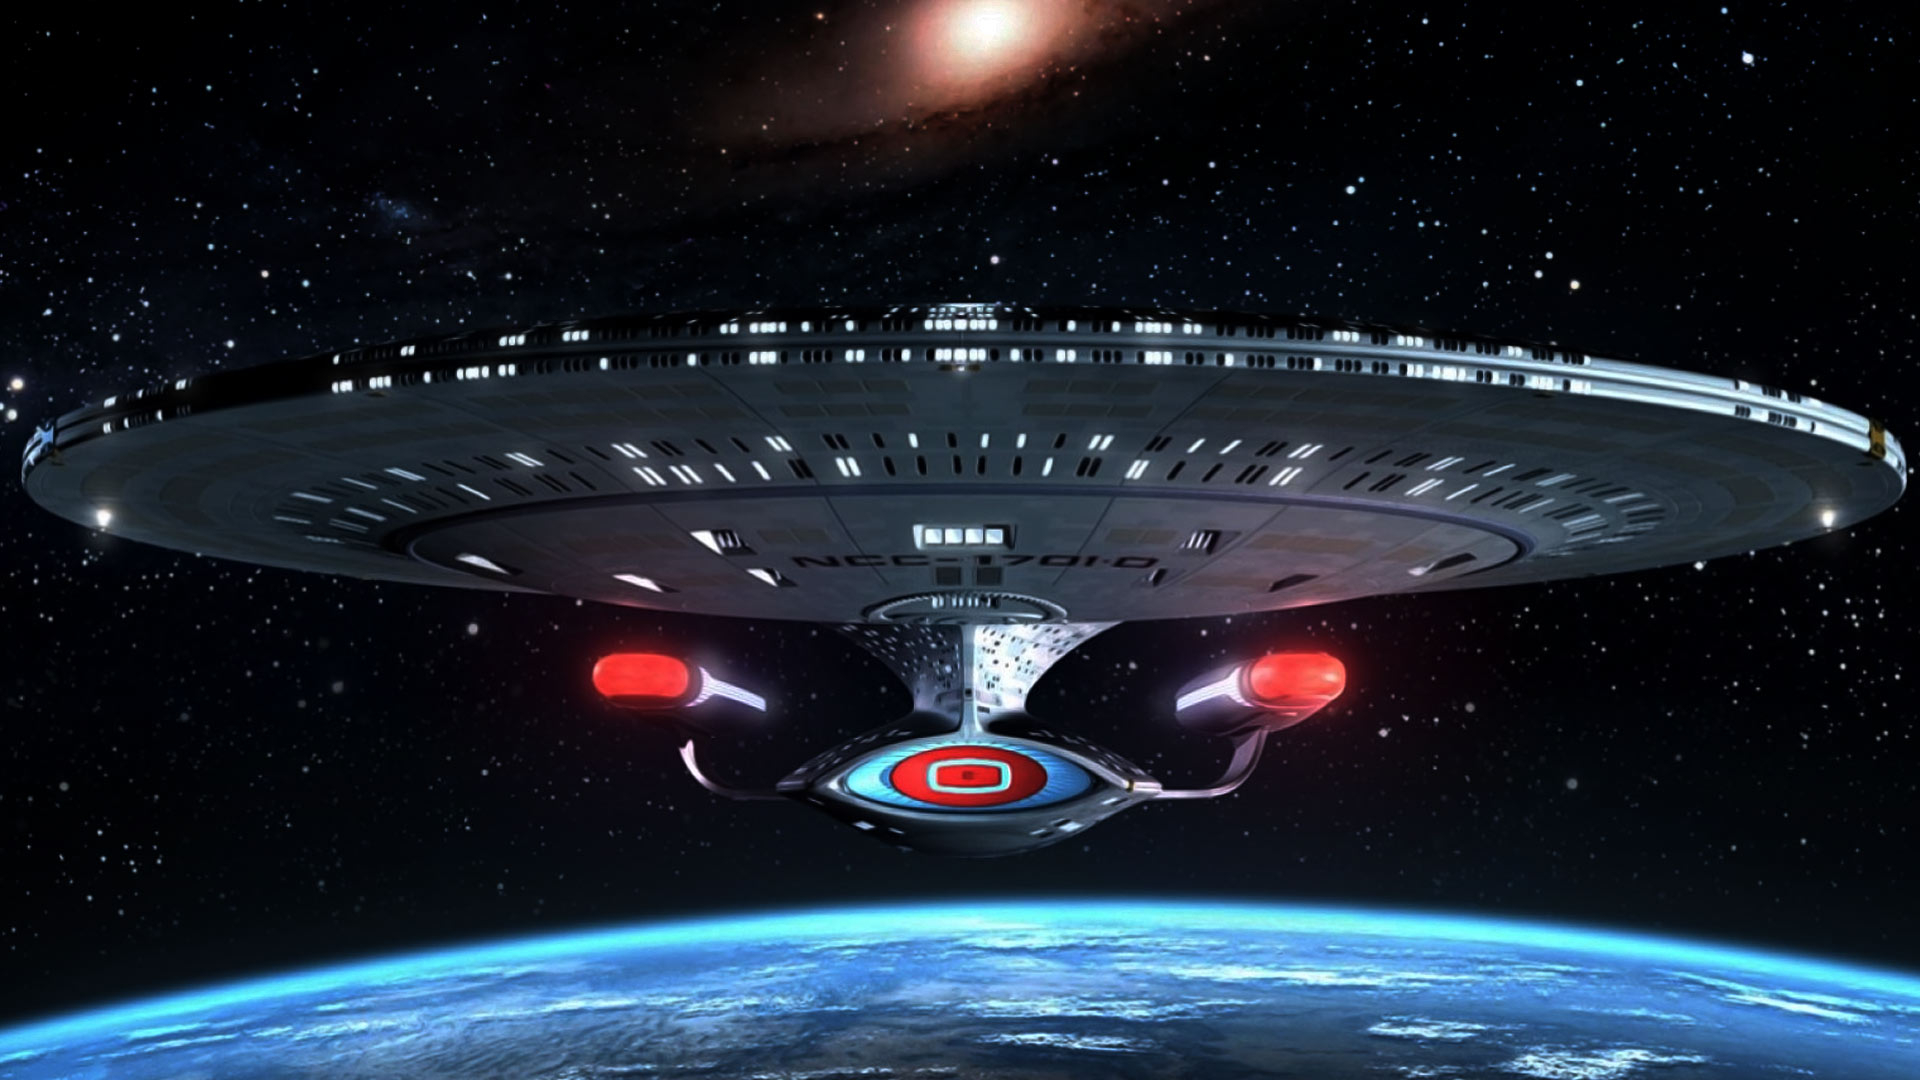 1920x1080 1100+ Sci Fi Star Trek HD Wallpapers and Backgrounds